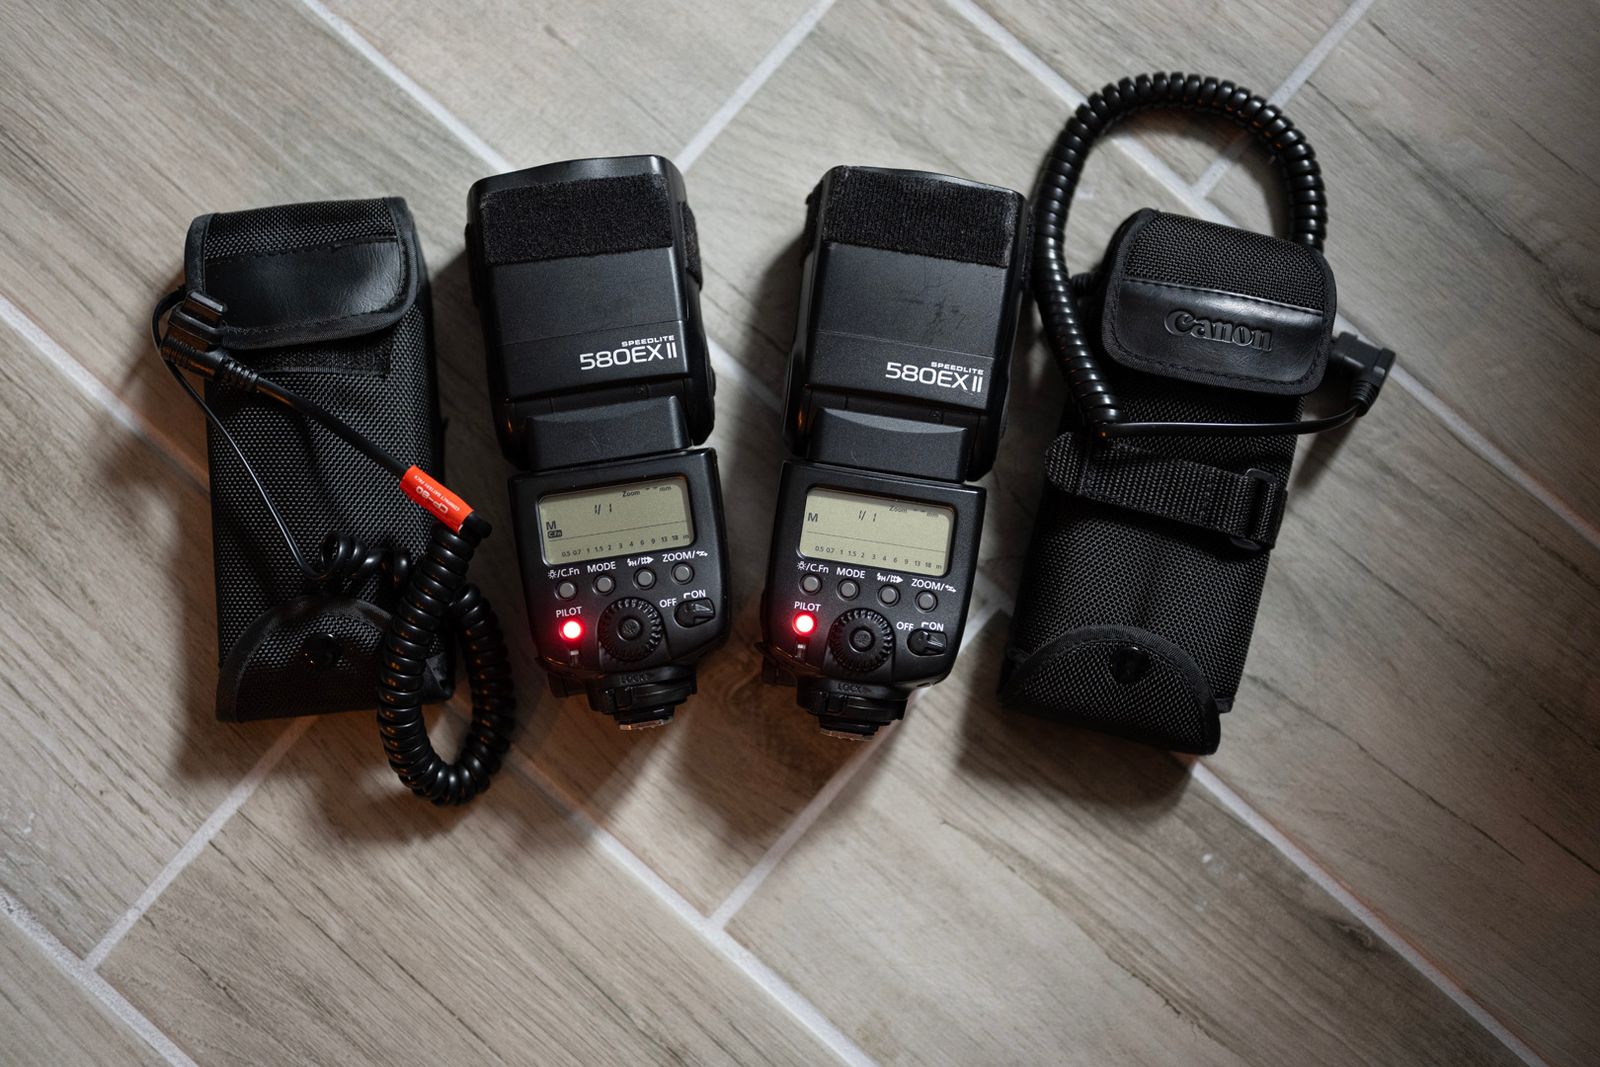 Canon 580 EXII flashes